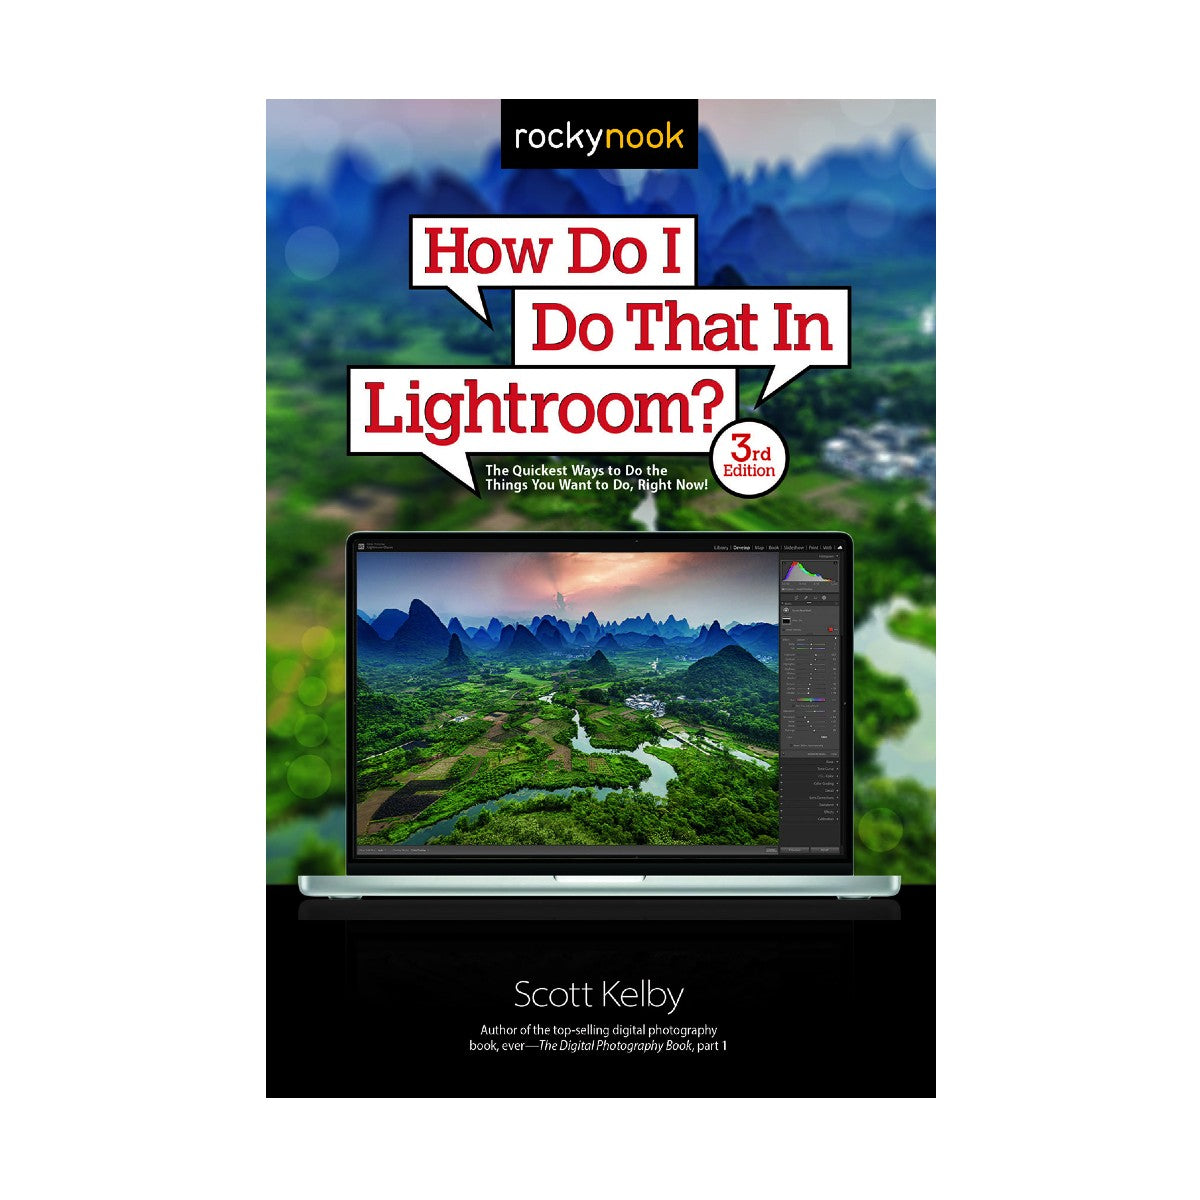 How Do I Do That In Lightroom? Book (3rd Edition)